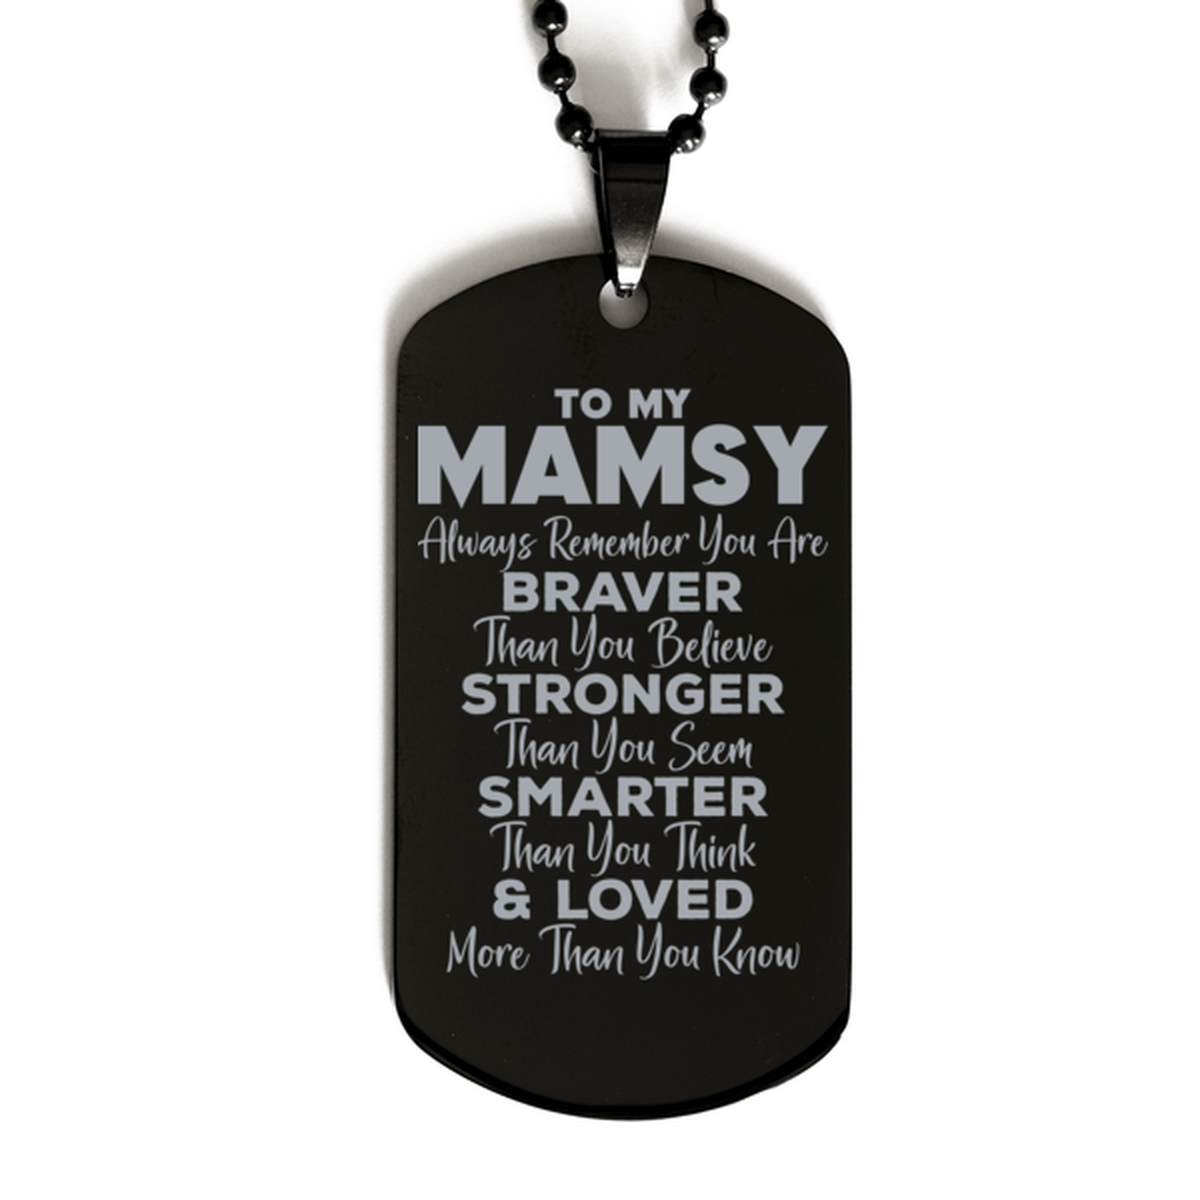 Motivational Mamsy Black Dog Tag Necklace, Mamsy Always Remember You Are Braver Than You Believe, Best Birthday Gifts for Mamsy